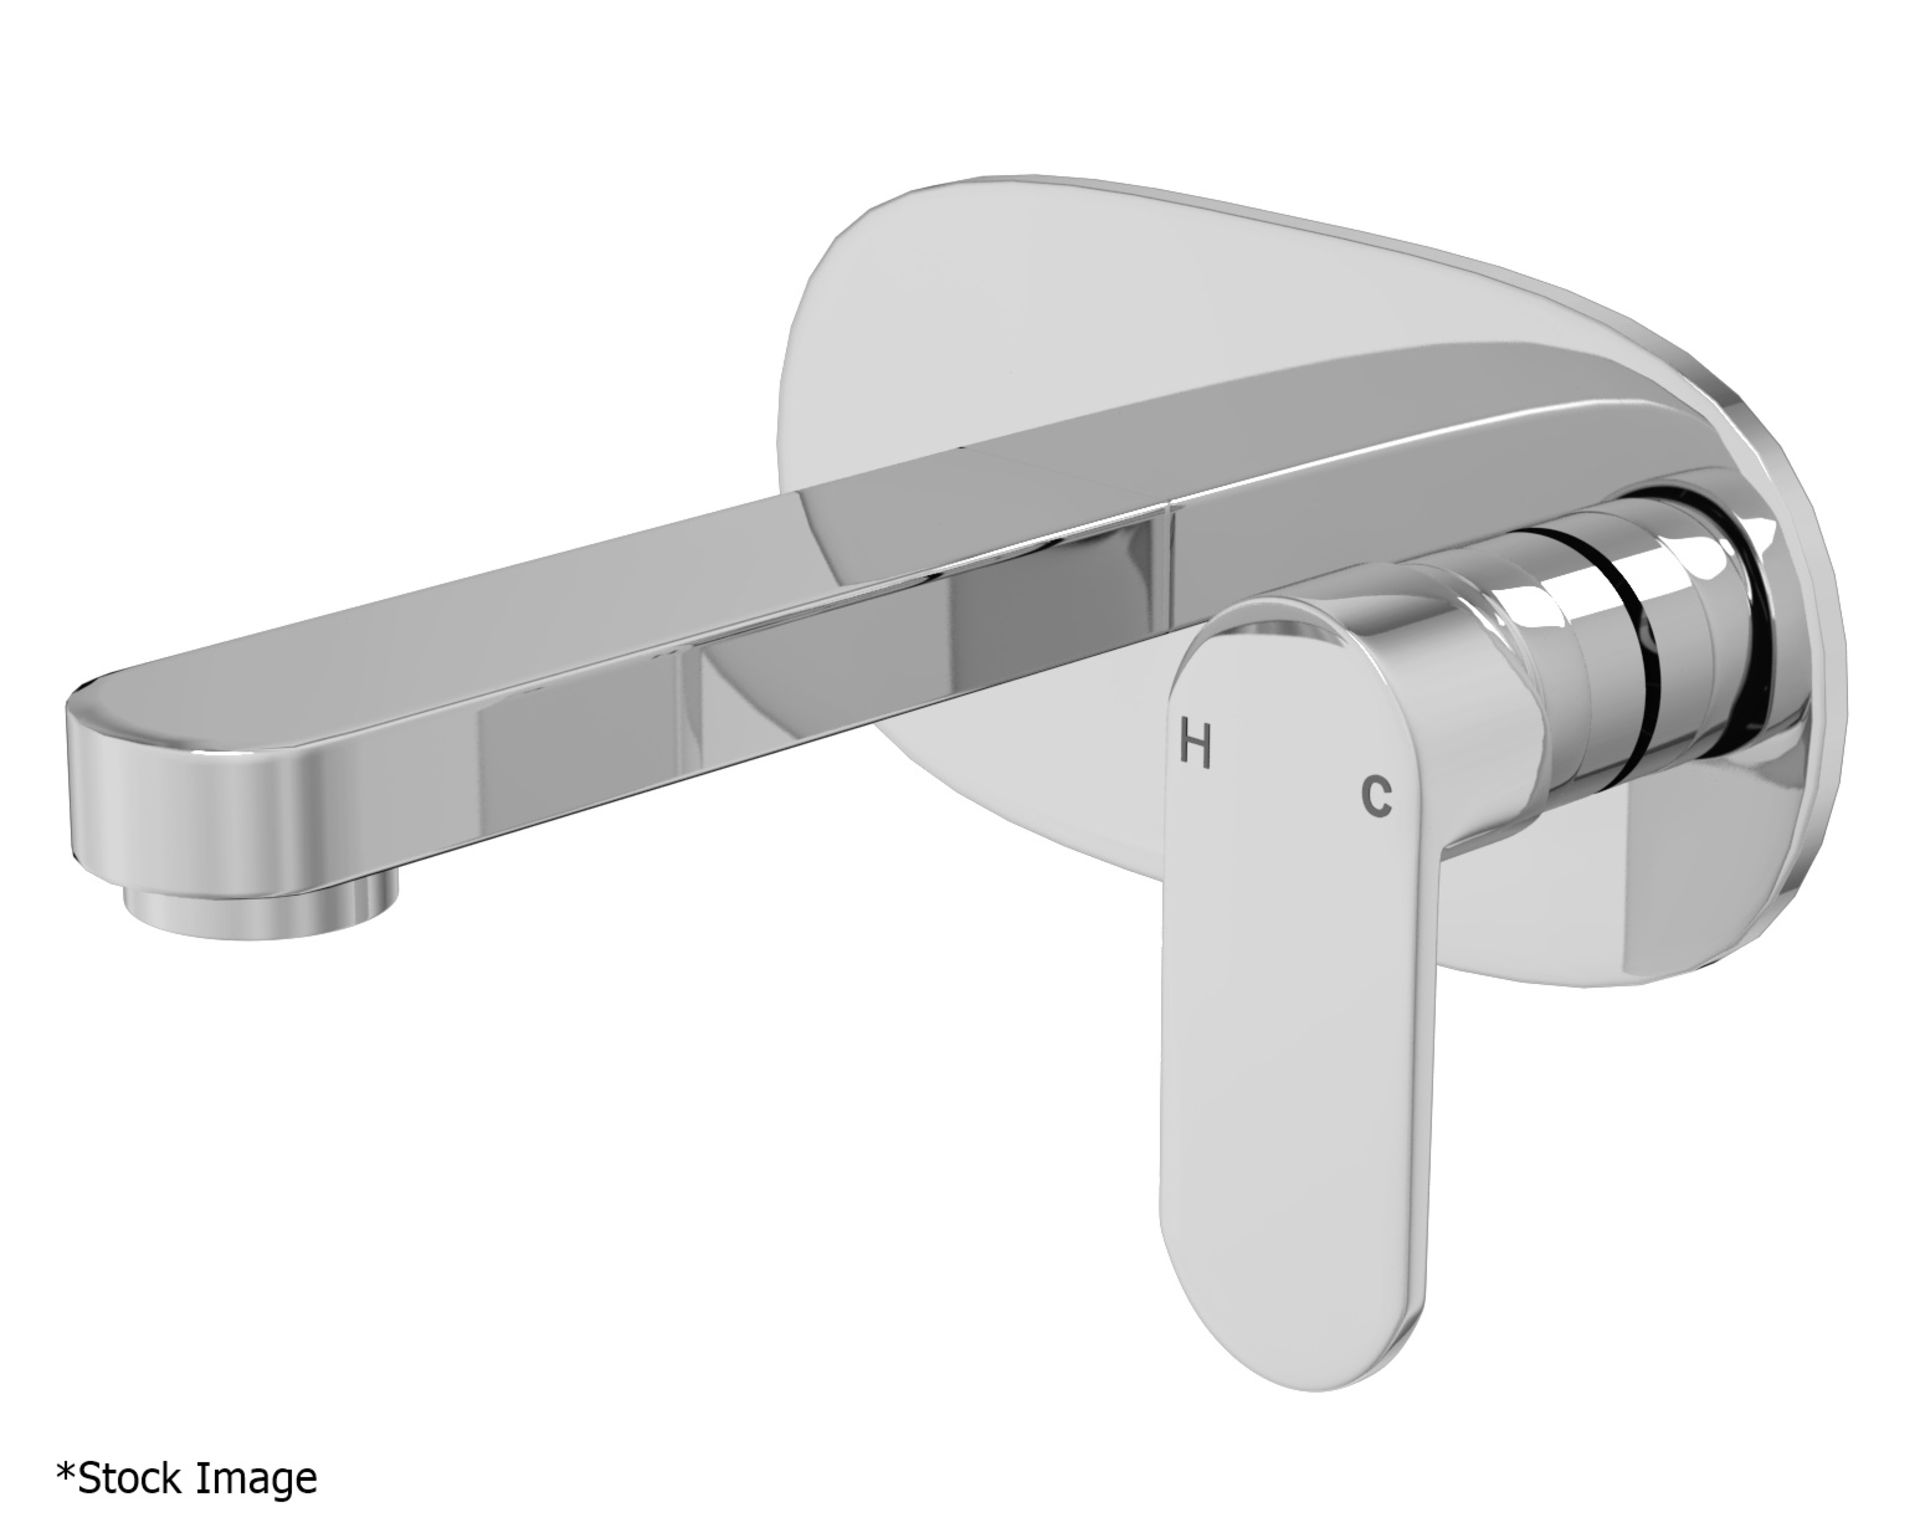 1 x CASSELLIE' Filo' Wall Mounted Basin Mixer Tap In Chrome - Ref: FIL001 - New & Boxed Stock - - Image 3 of 3